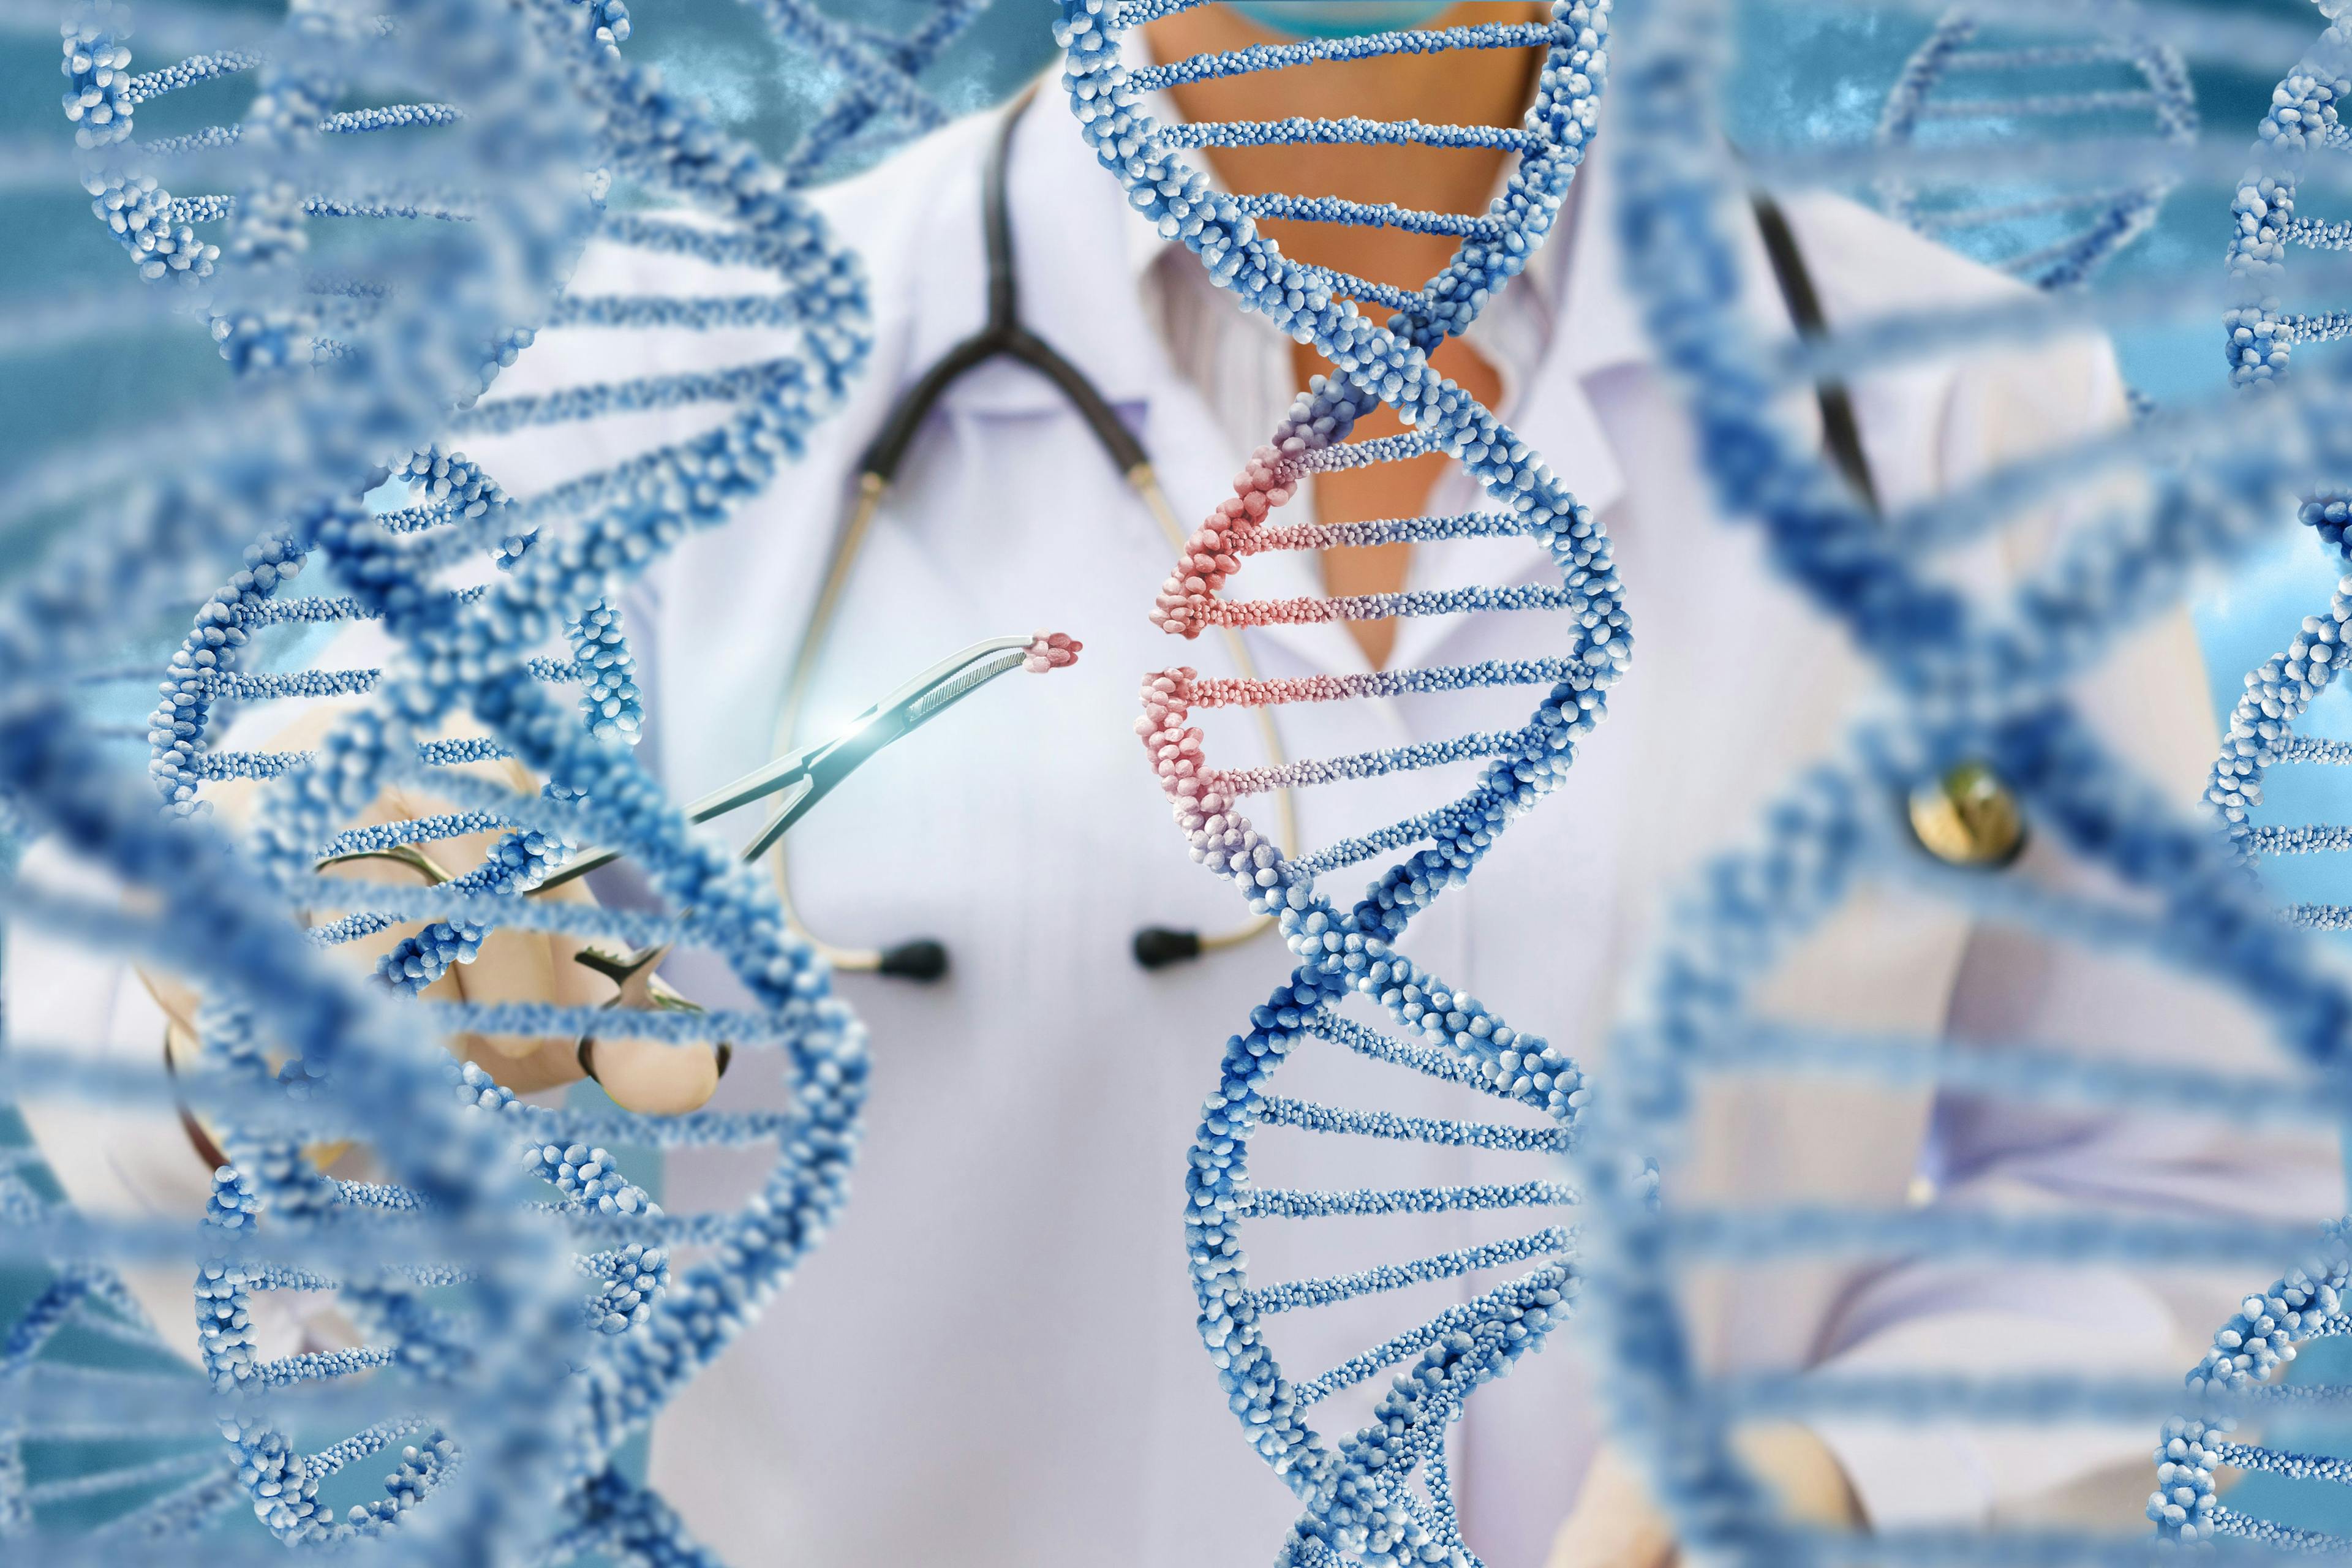 Pharmacogenomics Offers New Roles, Opportunities for Pharmacists